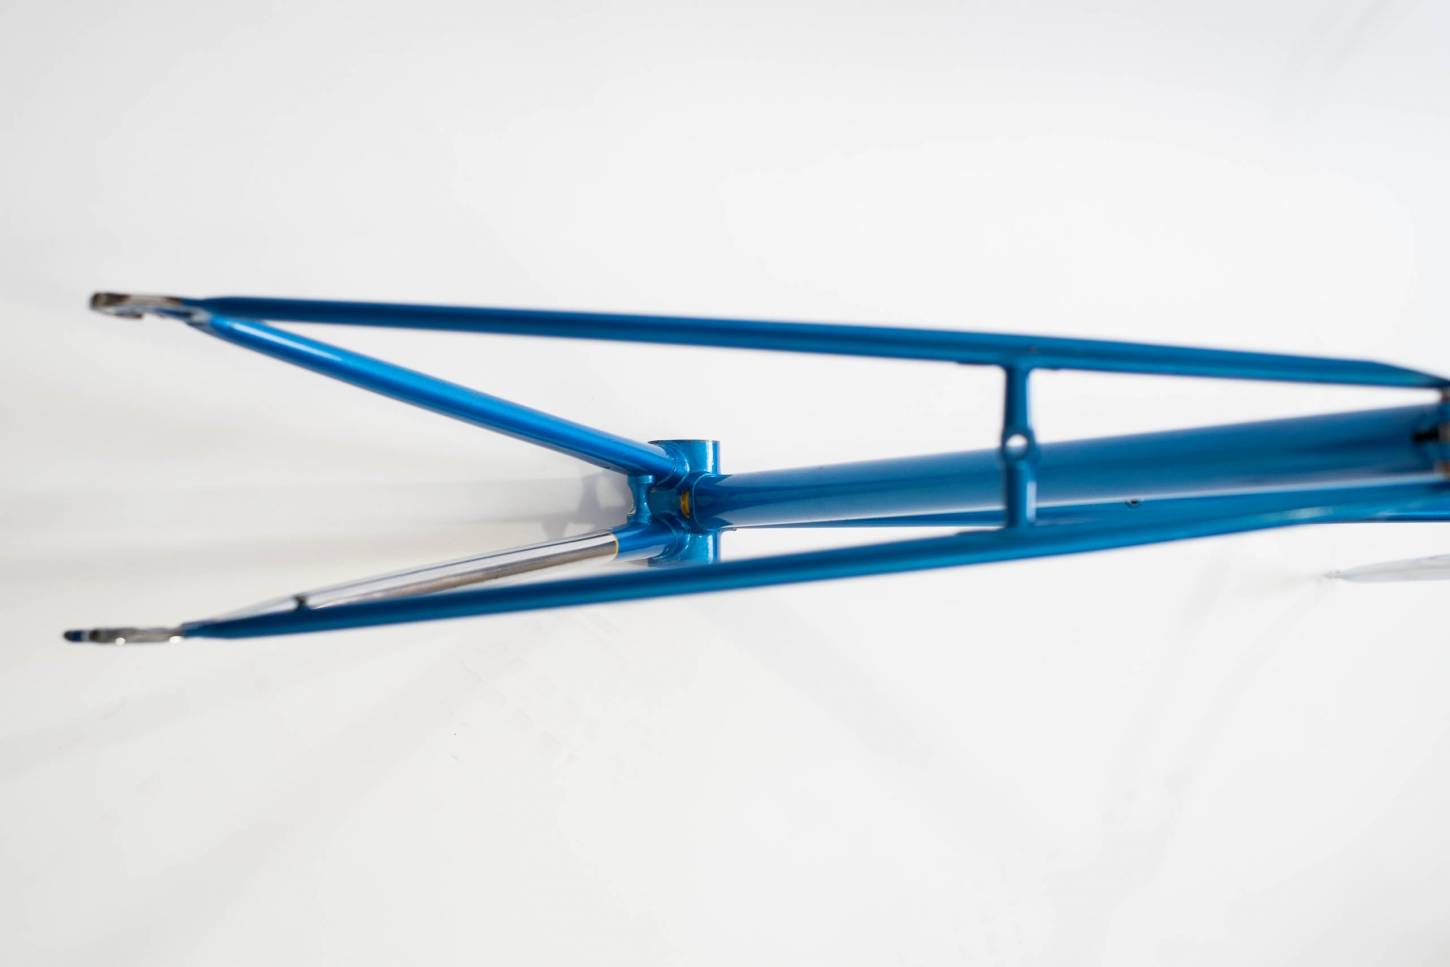 Columbus SL frame size 54 cm - drilled Campagnolo dropouts